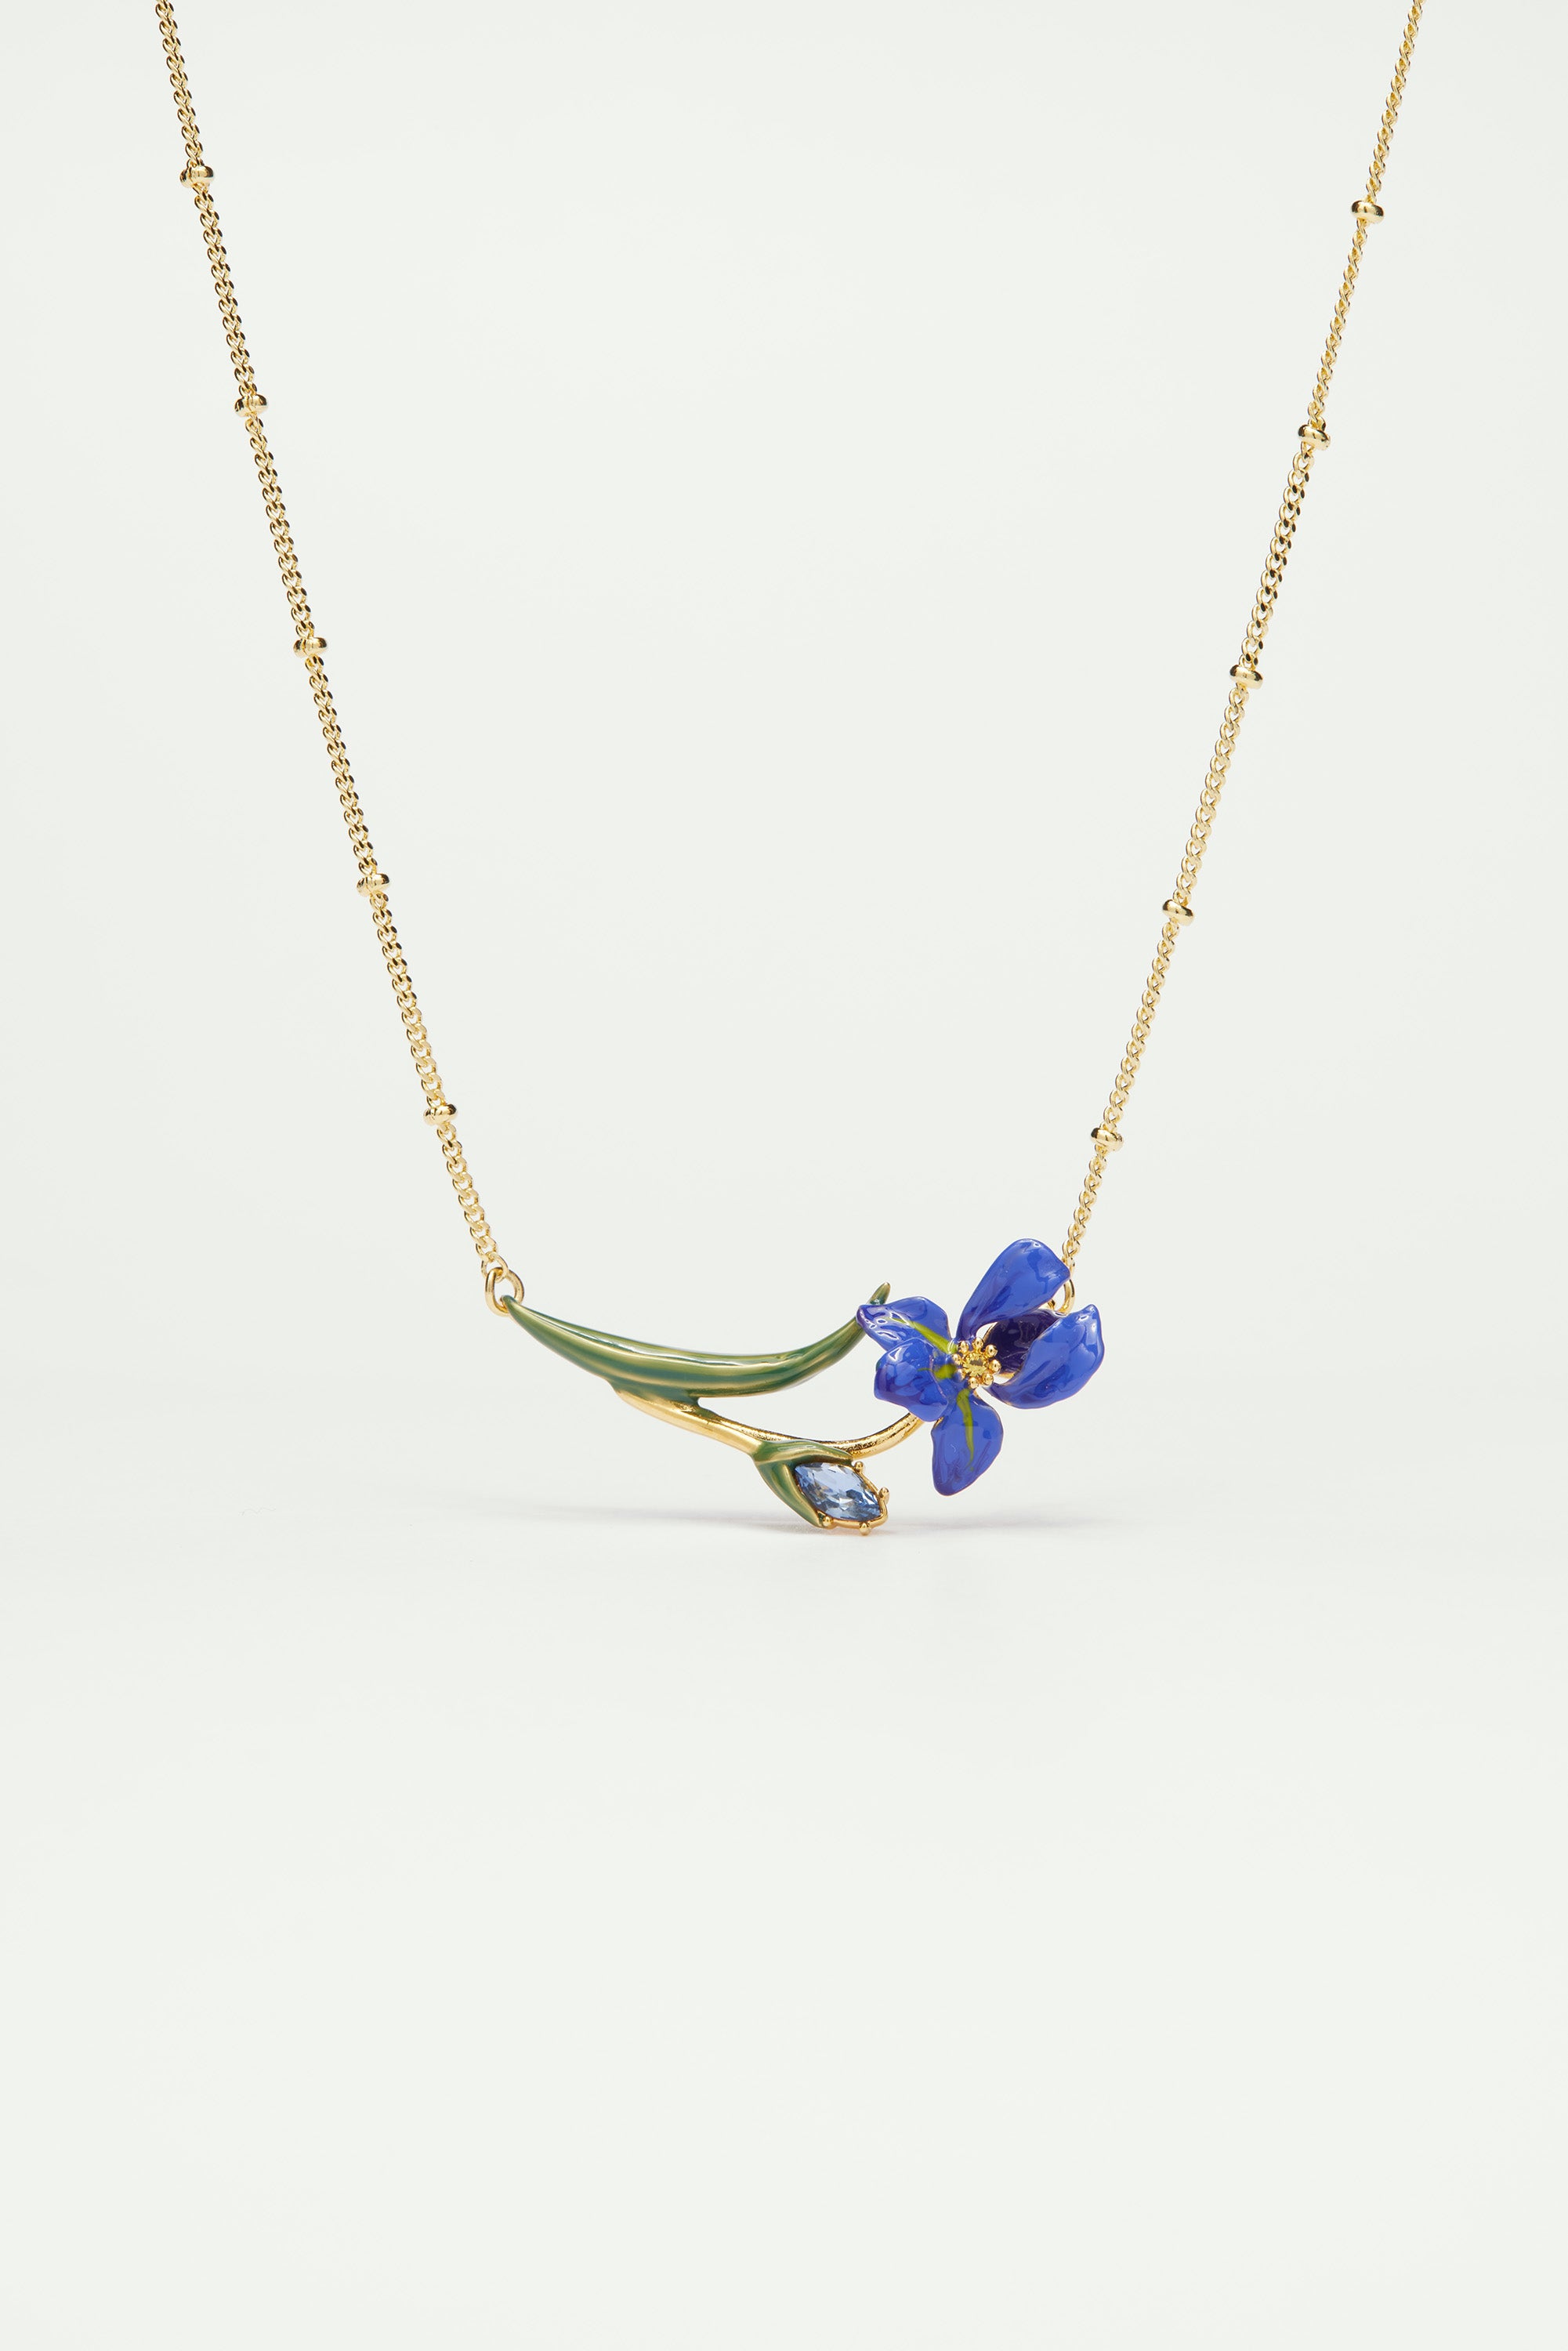 Siberian iris and faceted glass fine necklace